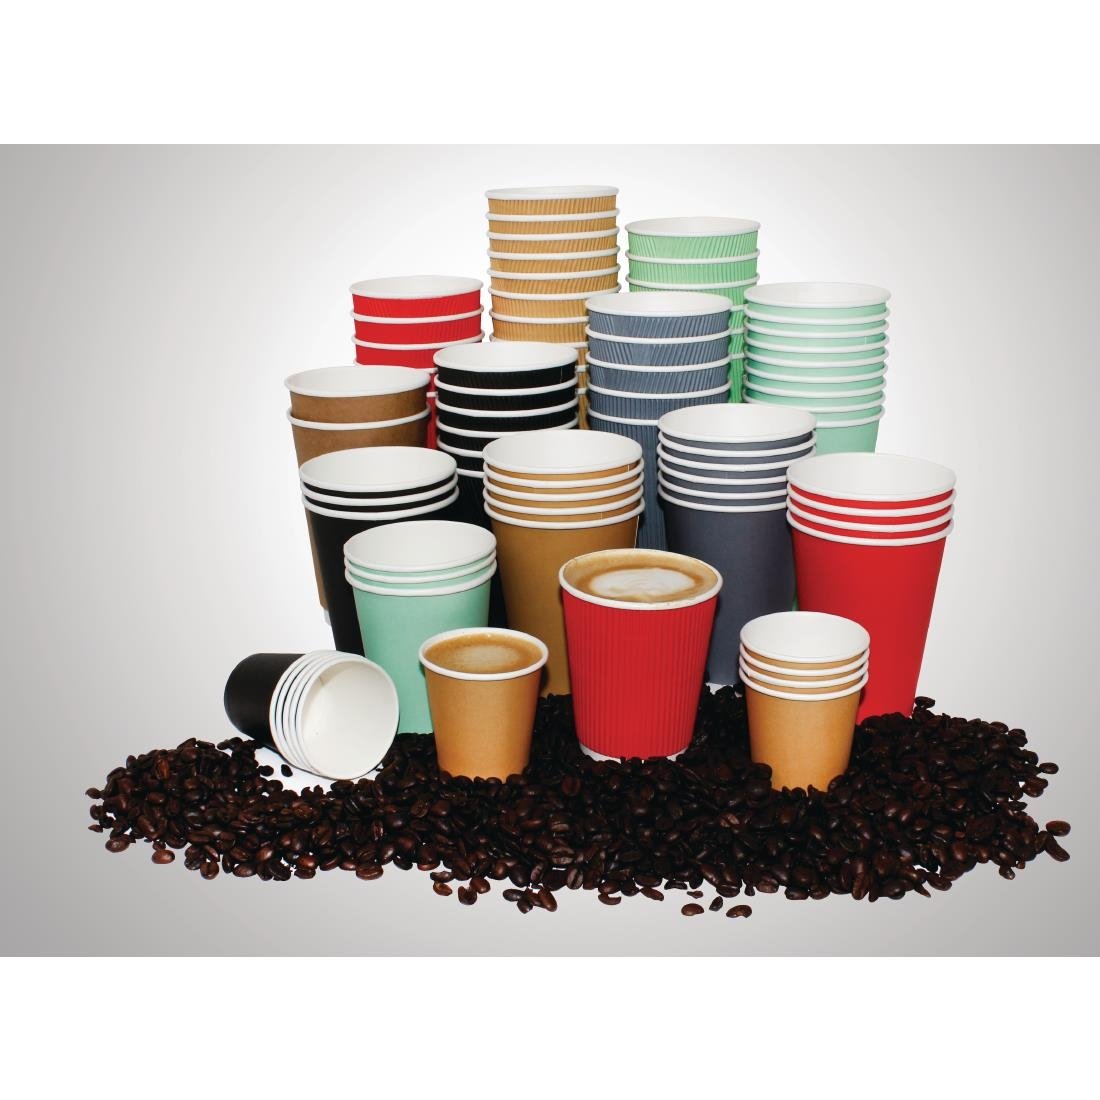 Fiesta Disposable Coffee Cups Ripple Wall Black 225ml / 8oz (Pack of 500) CM543 JD Catering Equipment Solutions Ltd